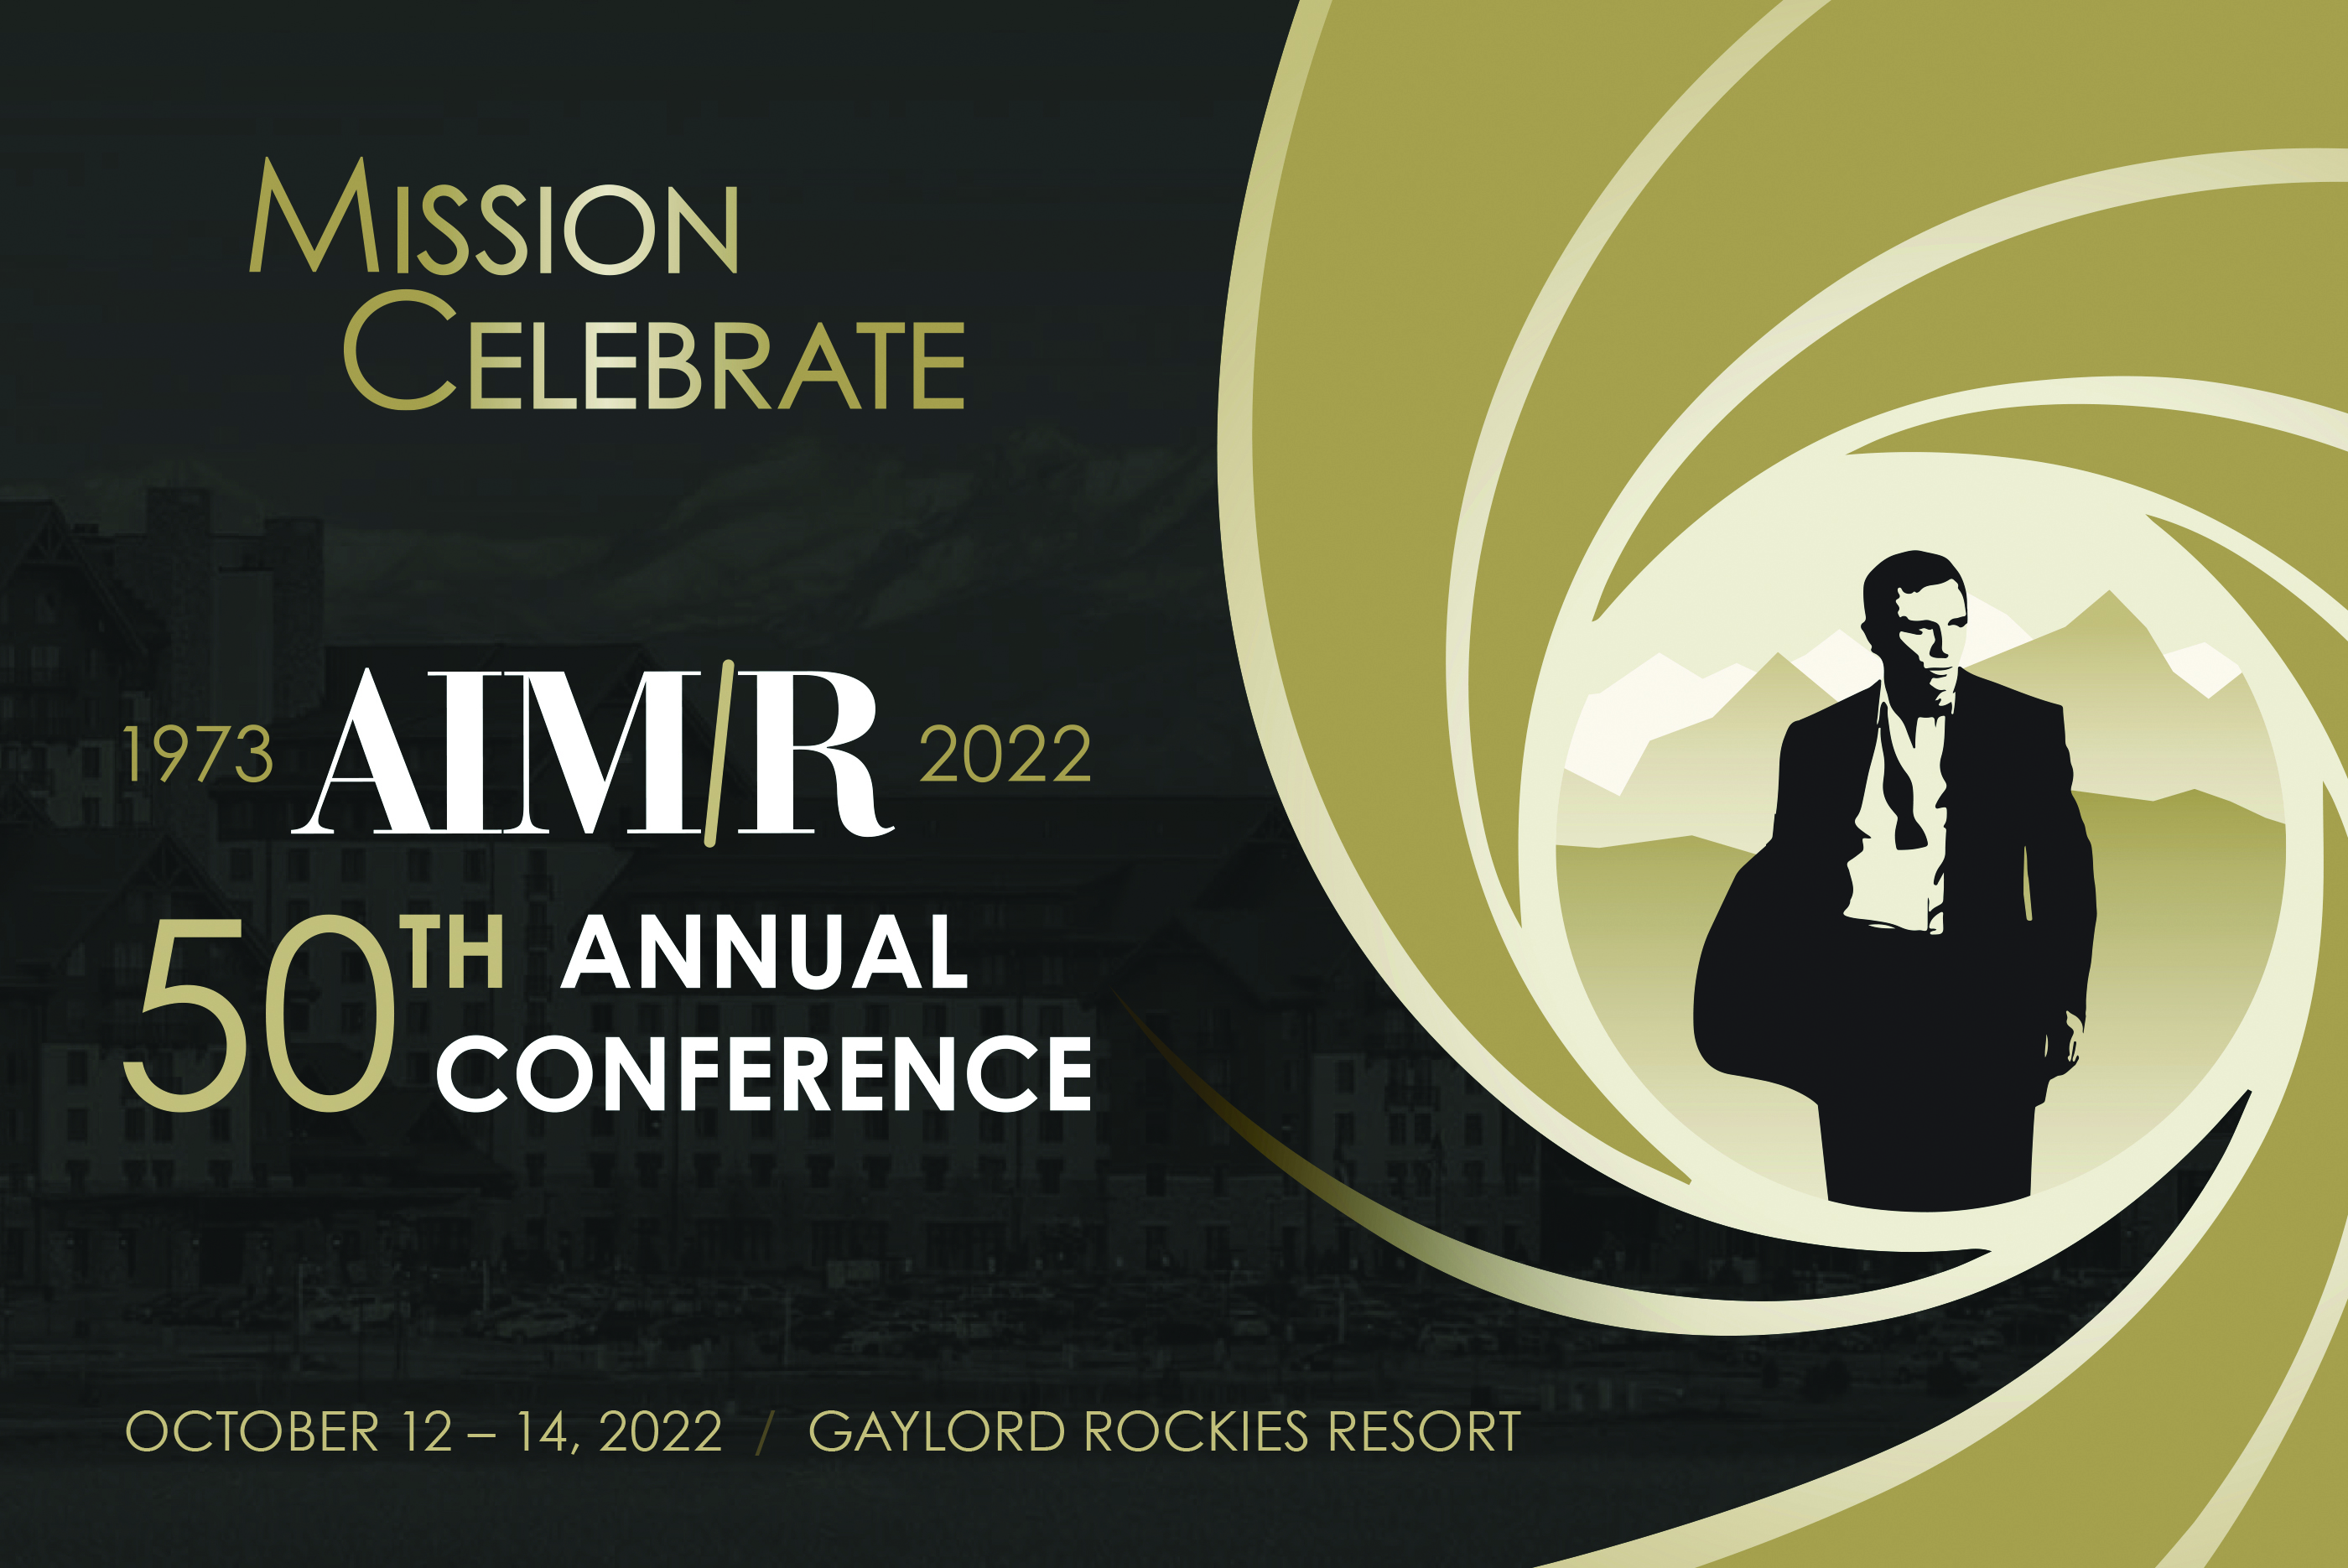 Registration Opens for AIMR Golden Anniversary